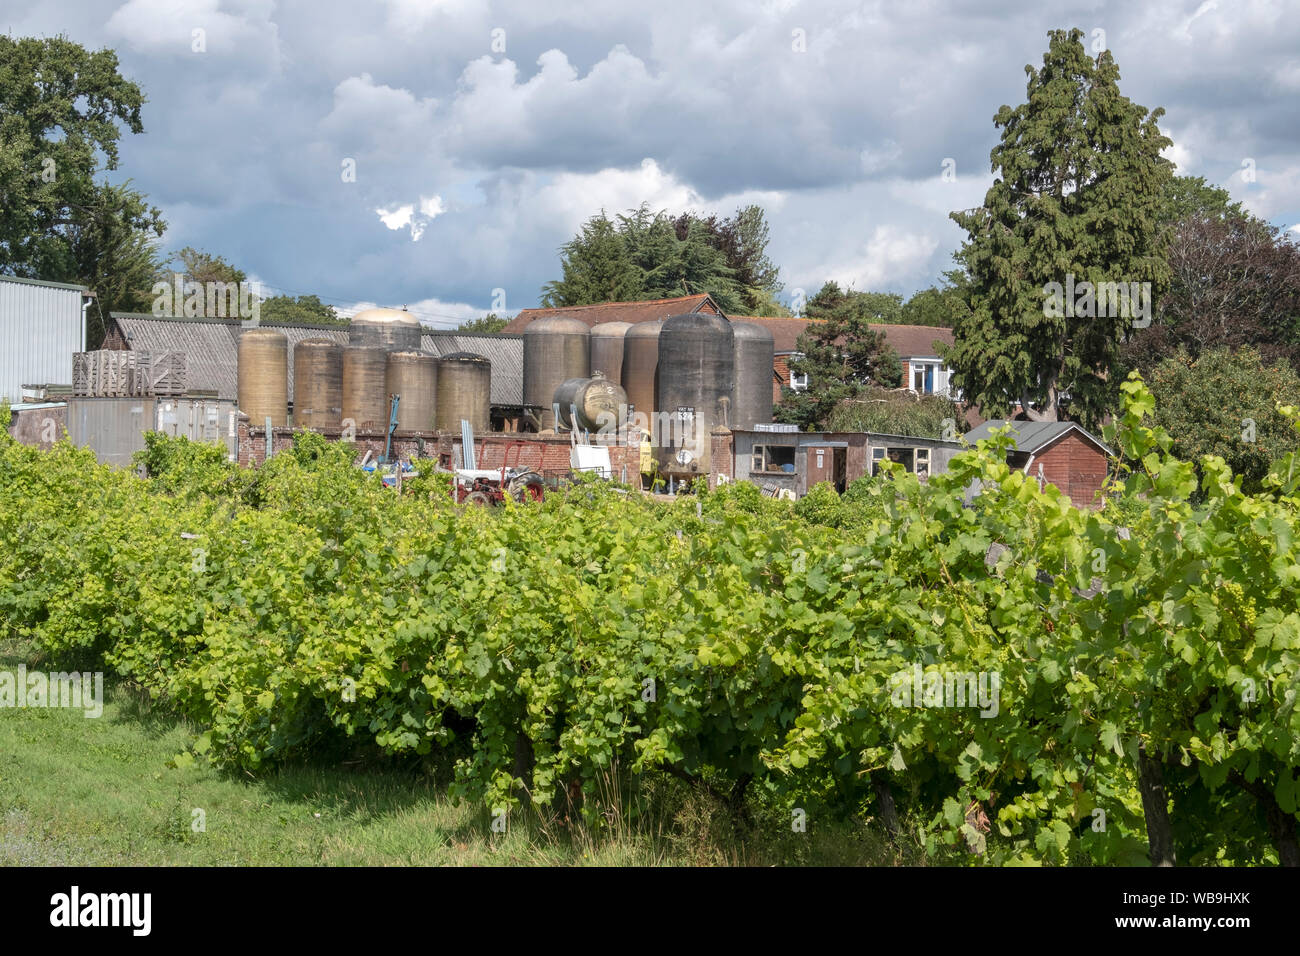 Grape vines and wine storage vats at Carr Taylor vineyard, Westfield, East Sussex, UK Stock Photo